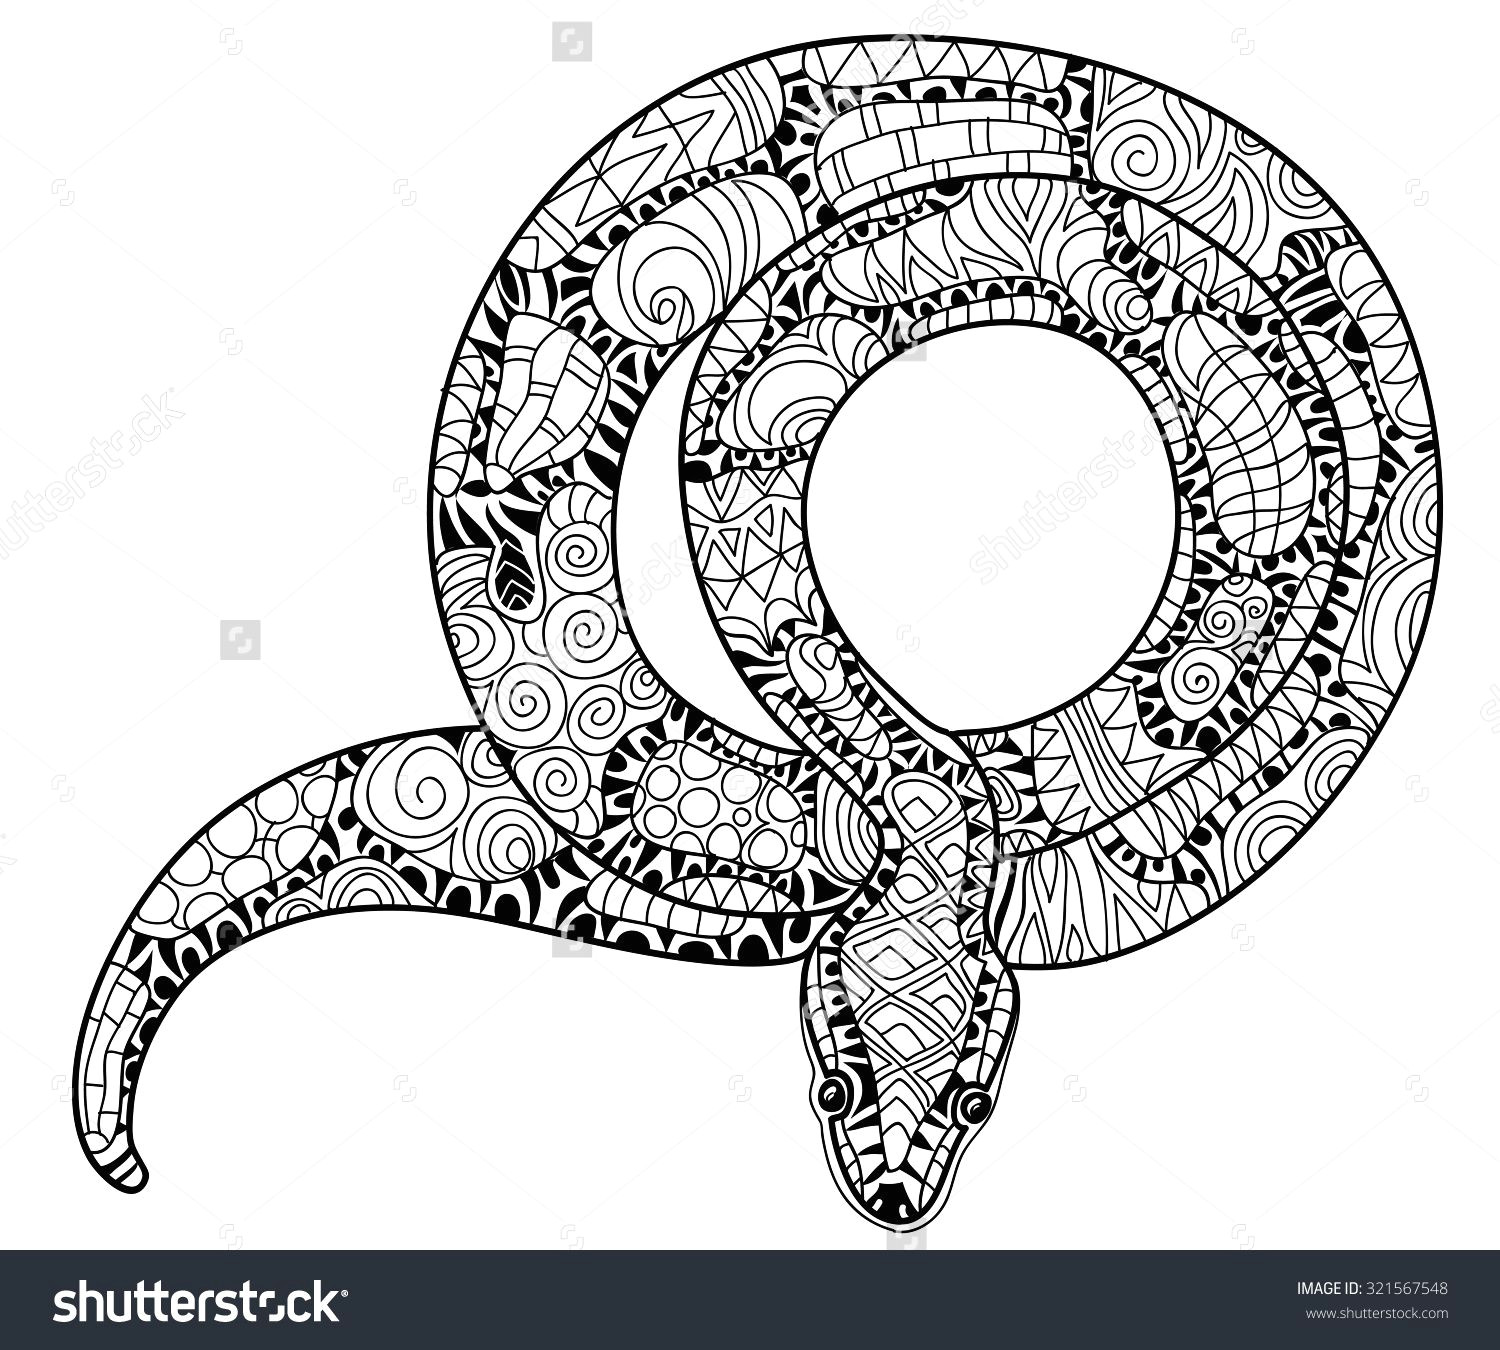 Easy Medusa Drawing Snake Zentangle Google Search Snake Coloring Pages